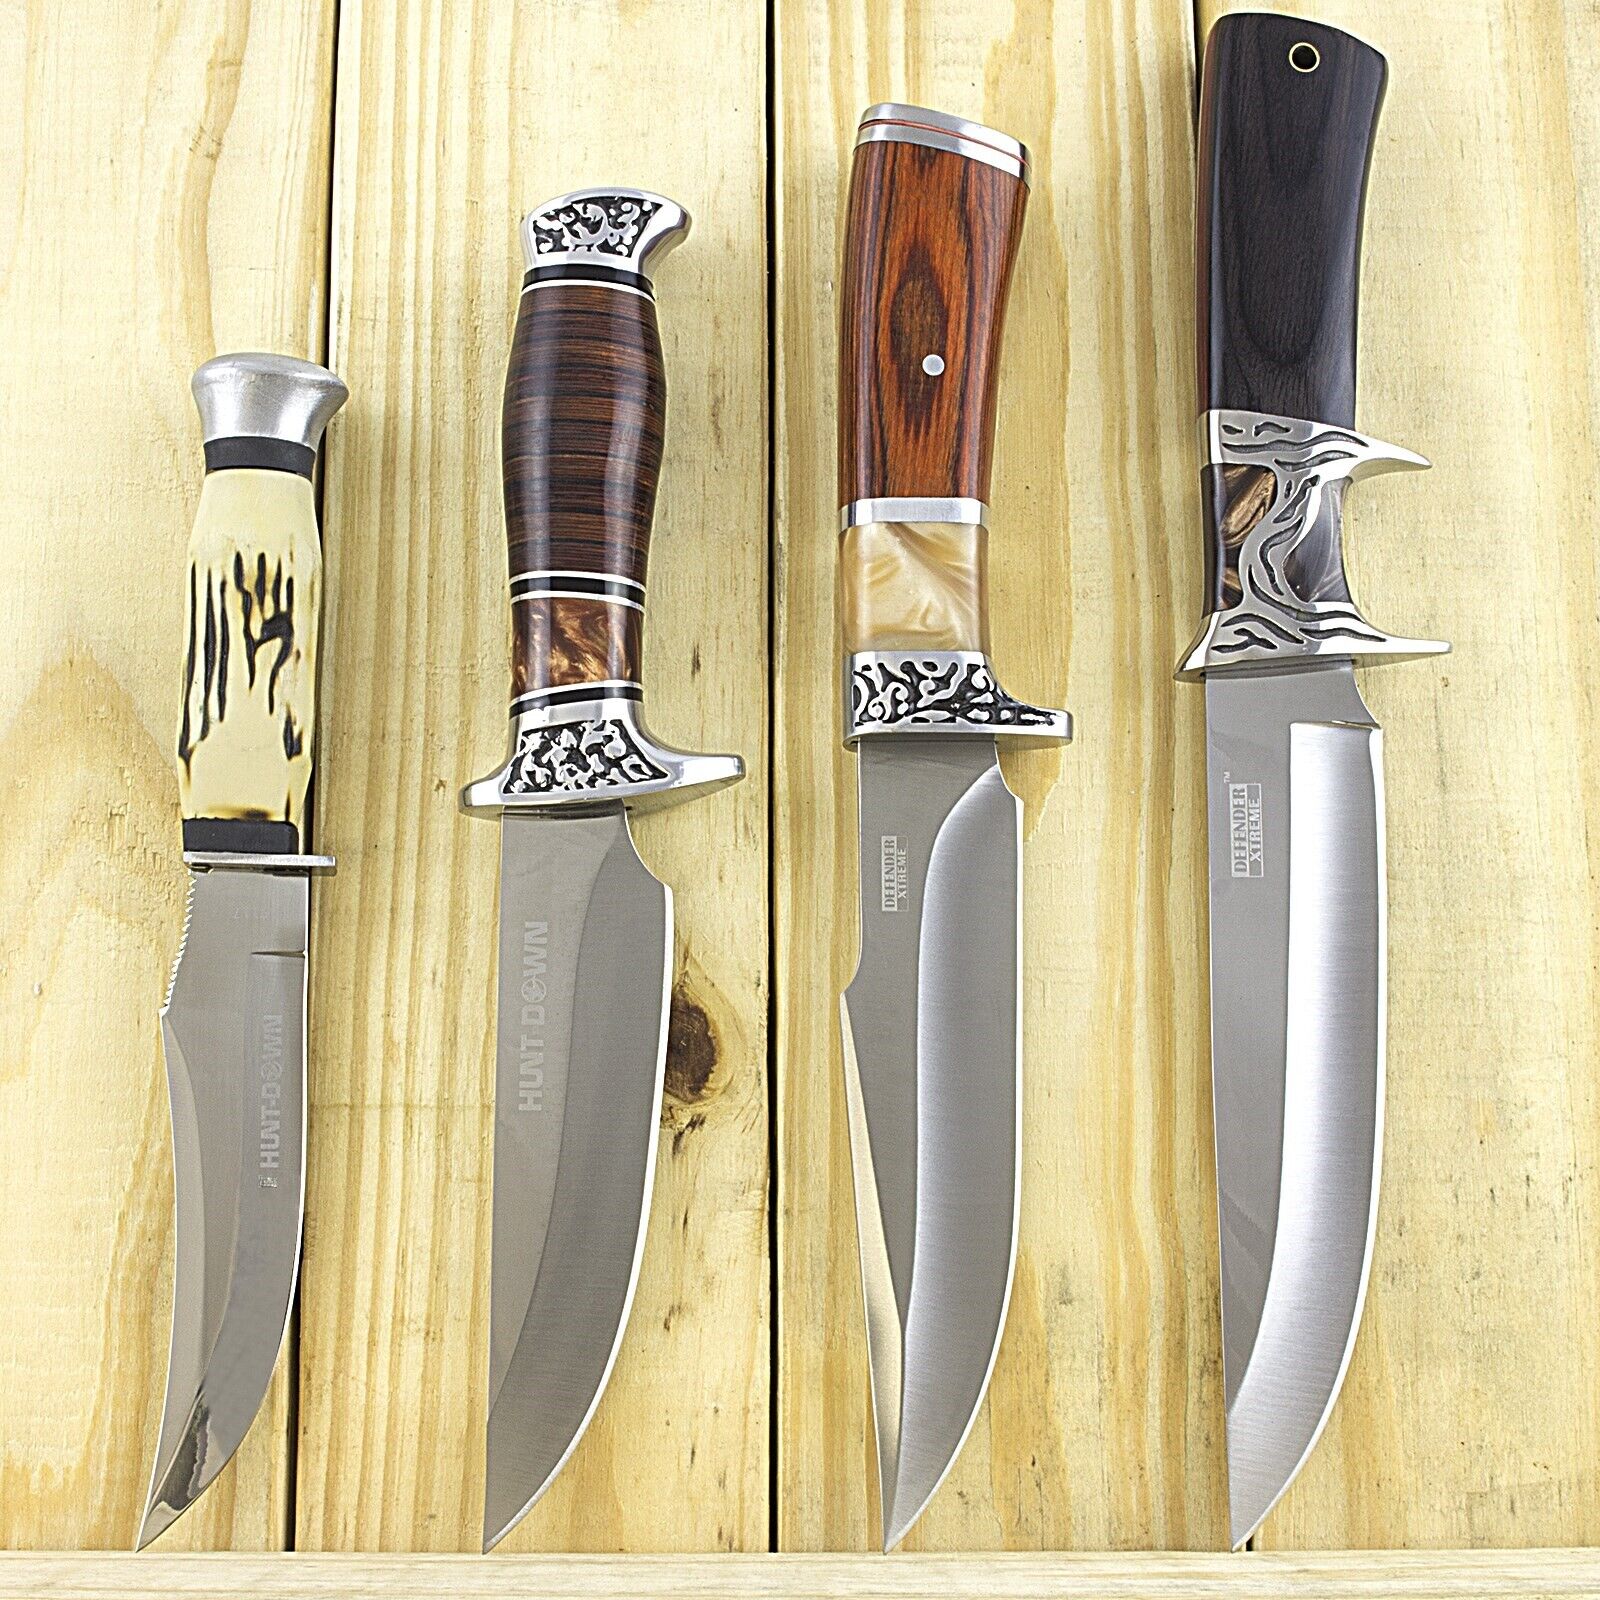 4 PC FIXED BLADE HUNTING KNIFE SET w/ WOOD HANDLE Combat Survival Bowie Lot Bulk